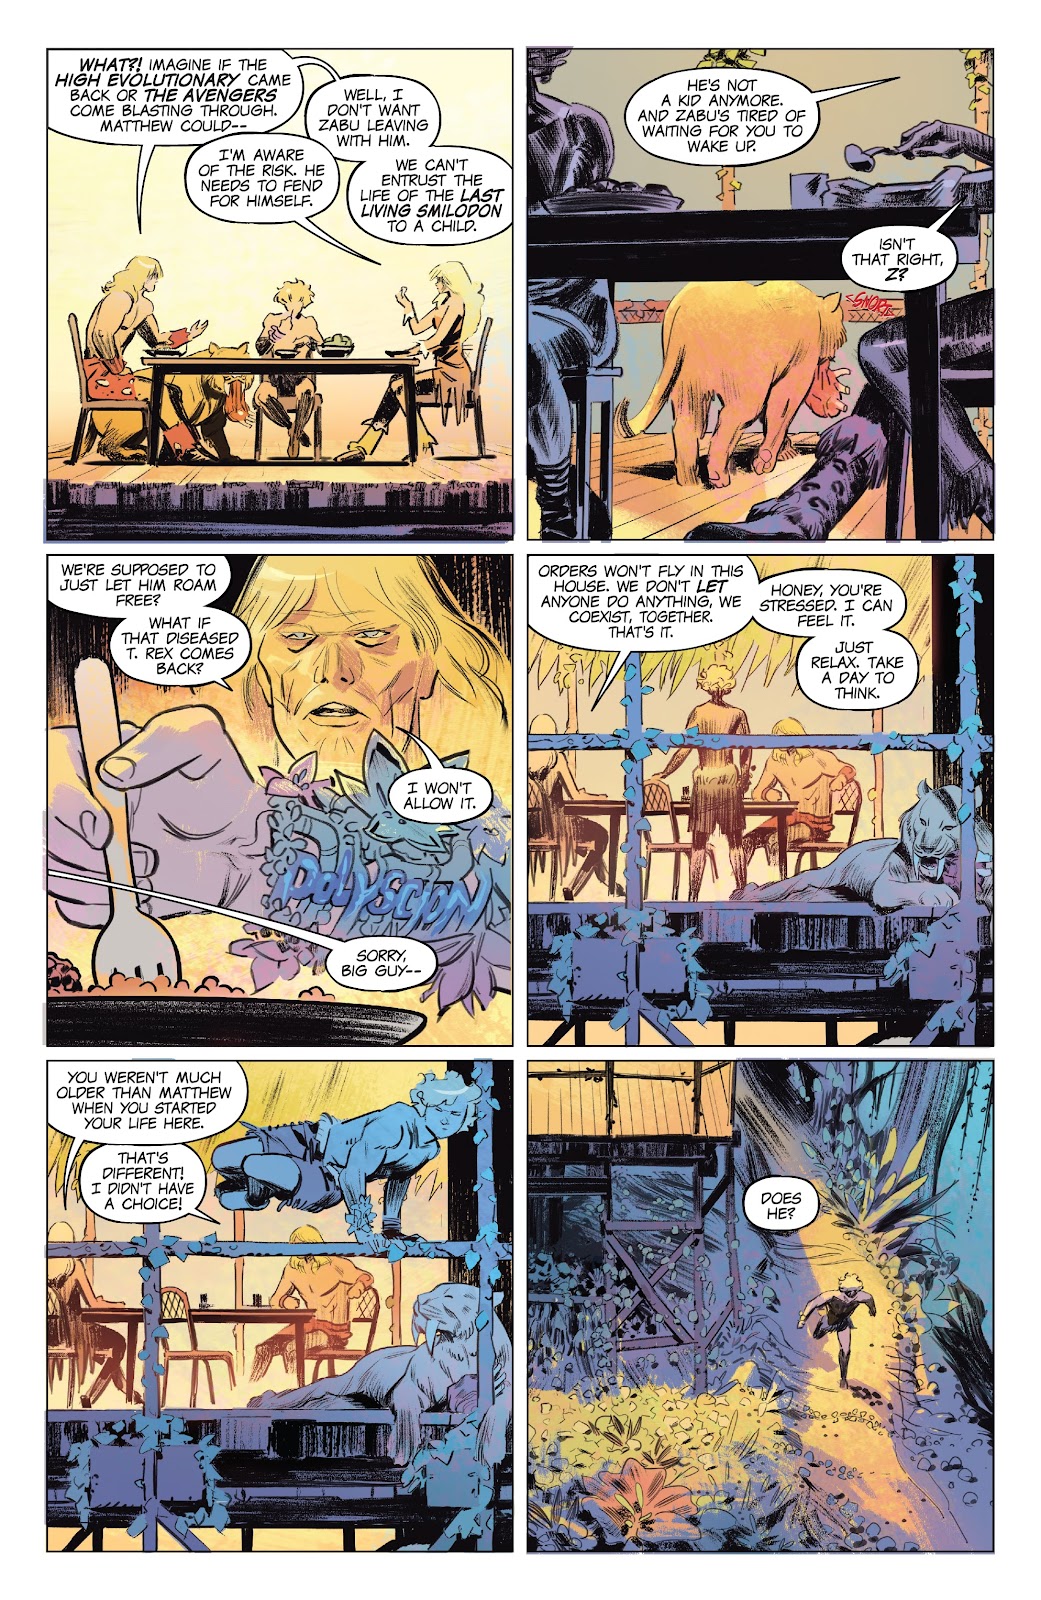 Ka-Zar Lord of the Savage Land issue 1 - Page 18